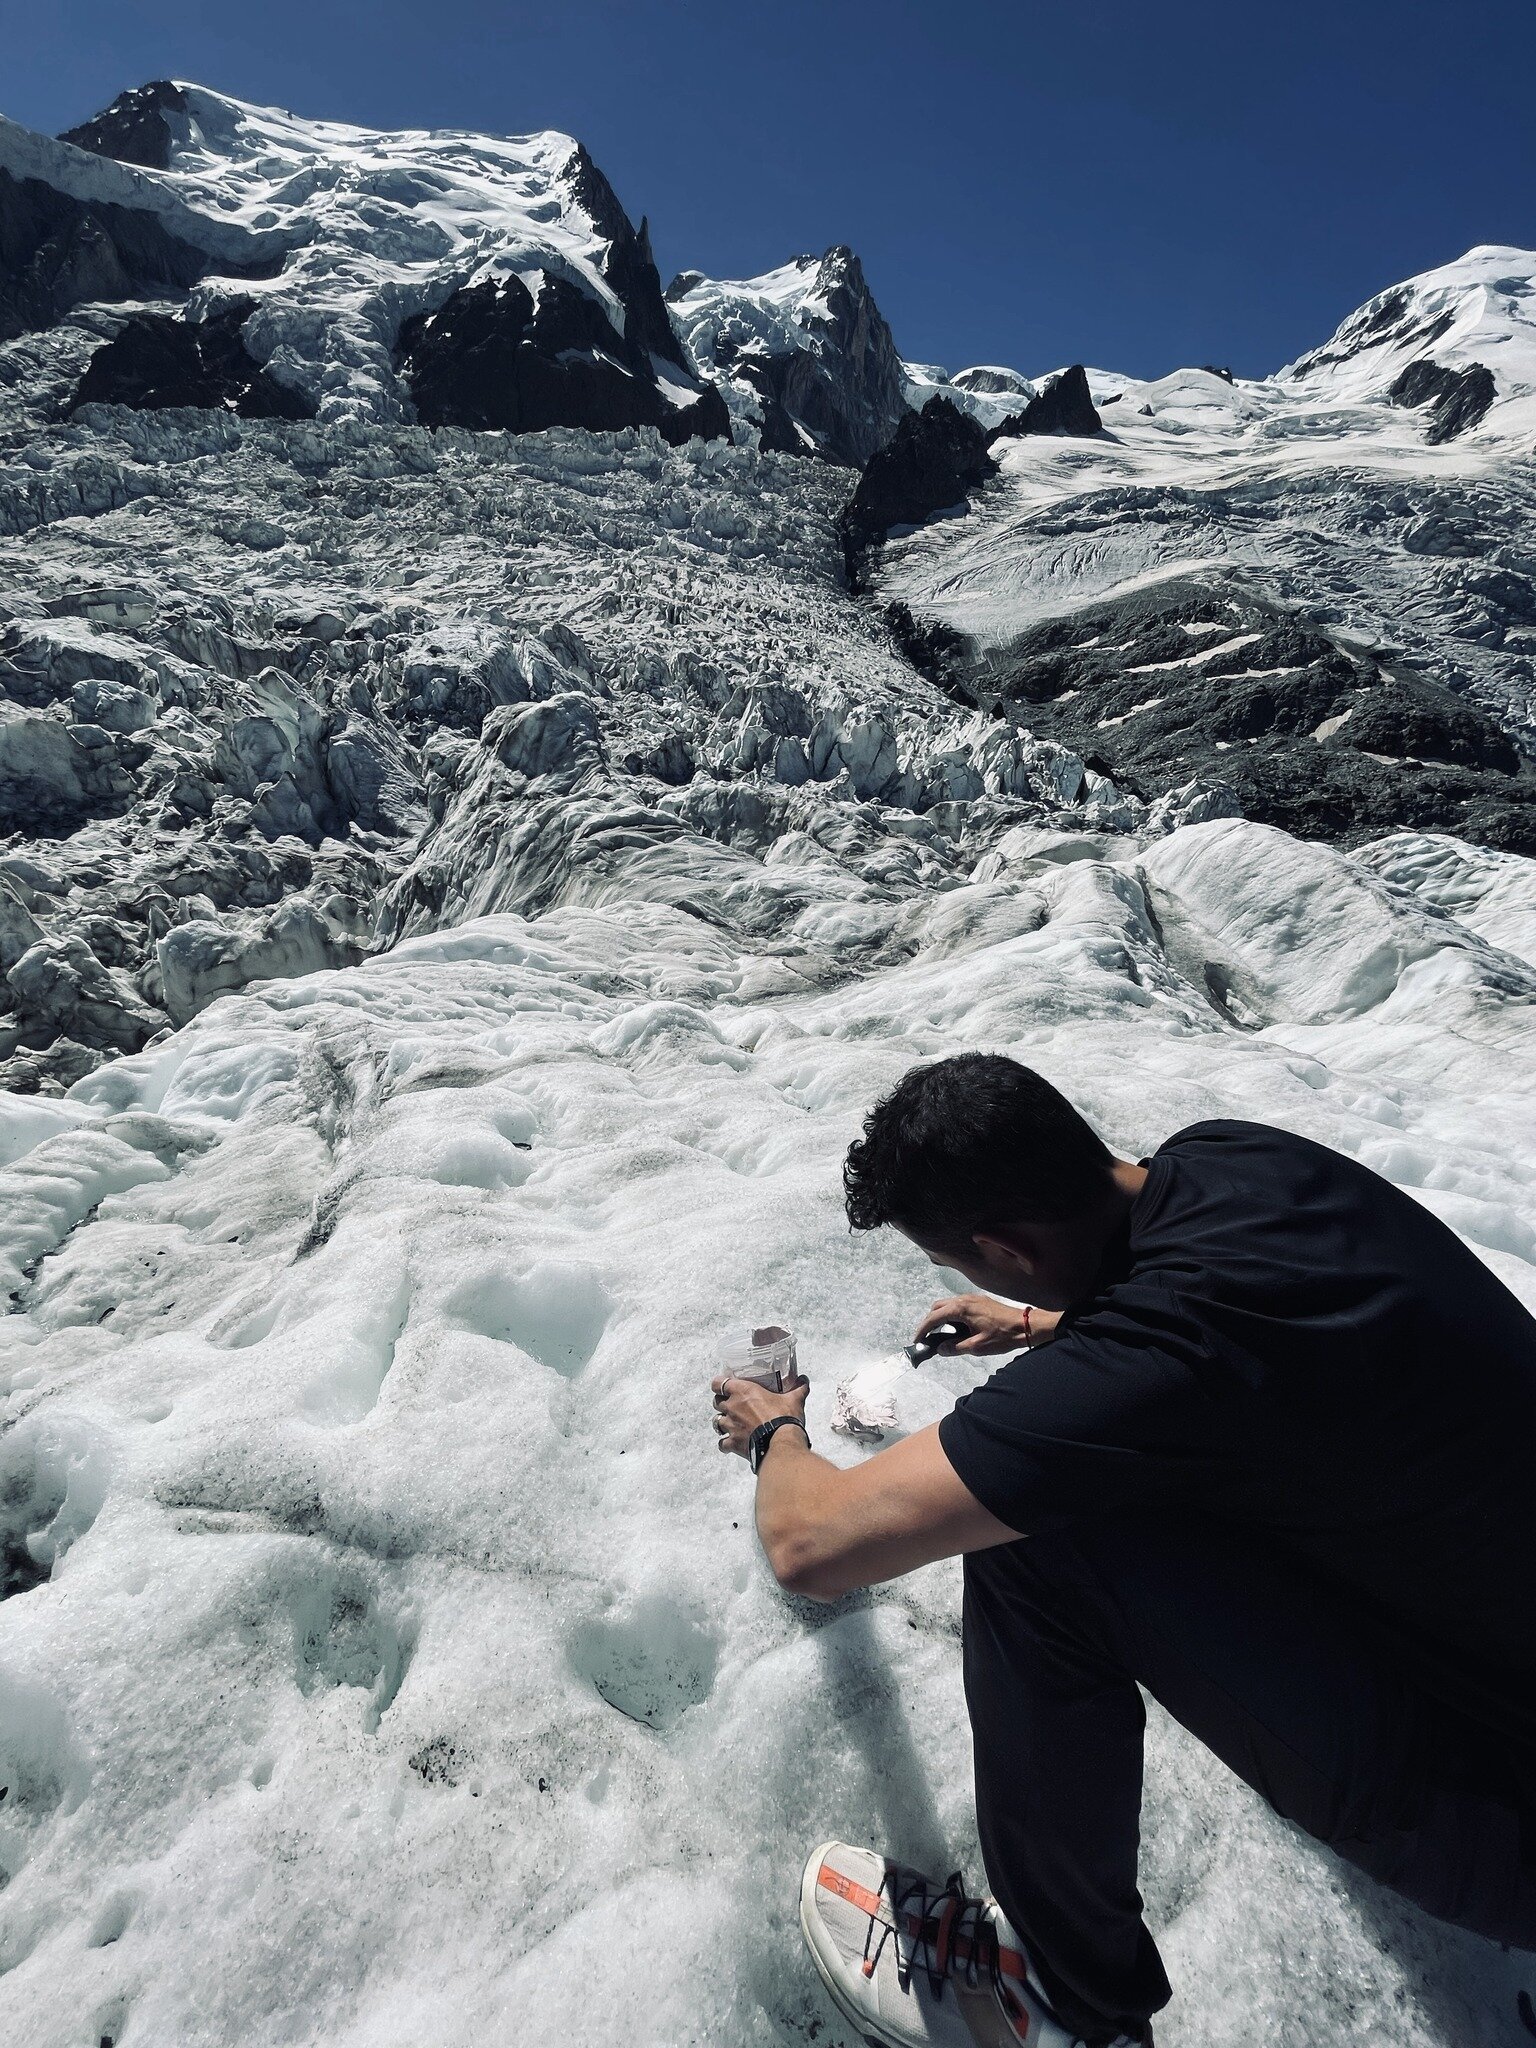 On a glacier below Mont Blanc.
Moulding on the surface of the Bossons Glacier.🗻
Each moulding captures a fingerprint detail of the ice. Preserved forever.

The only jewellery formed by mountains and glaciers.

 #garogosi #glacier #mountain #art #scu